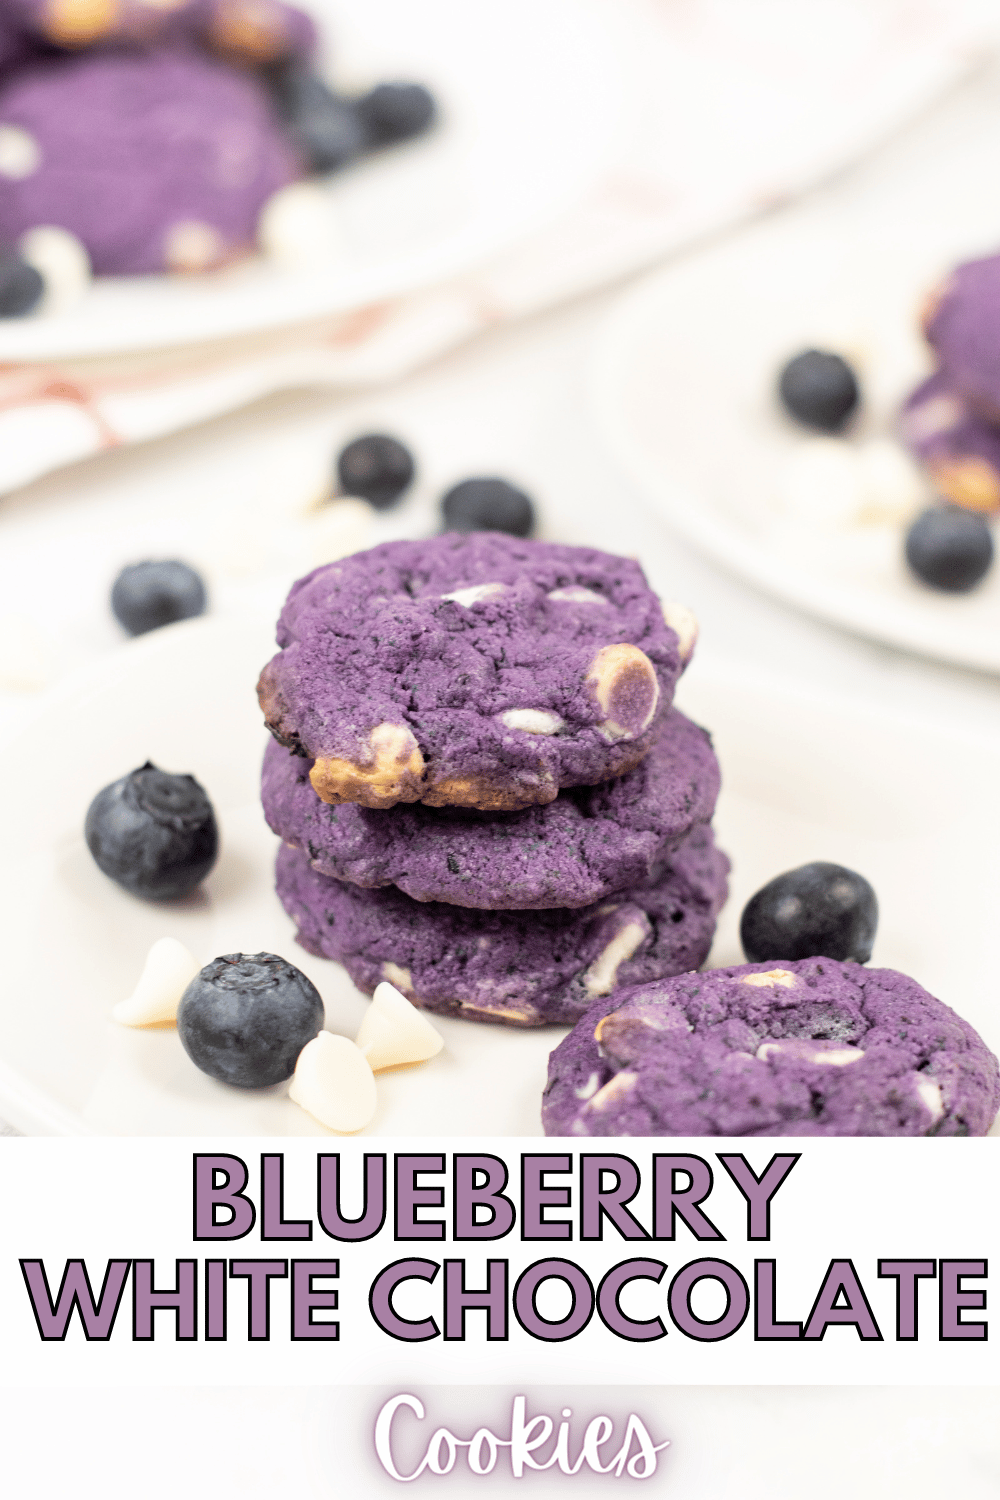 Blueberry White Chocolate Cookies are the perfect summer dessert! These cookies are soft, chewy and full of flavor. #blueberrywhitechocolatecookies #blueberry #whitechocolate #cookies #recipe via @wondermomwannab